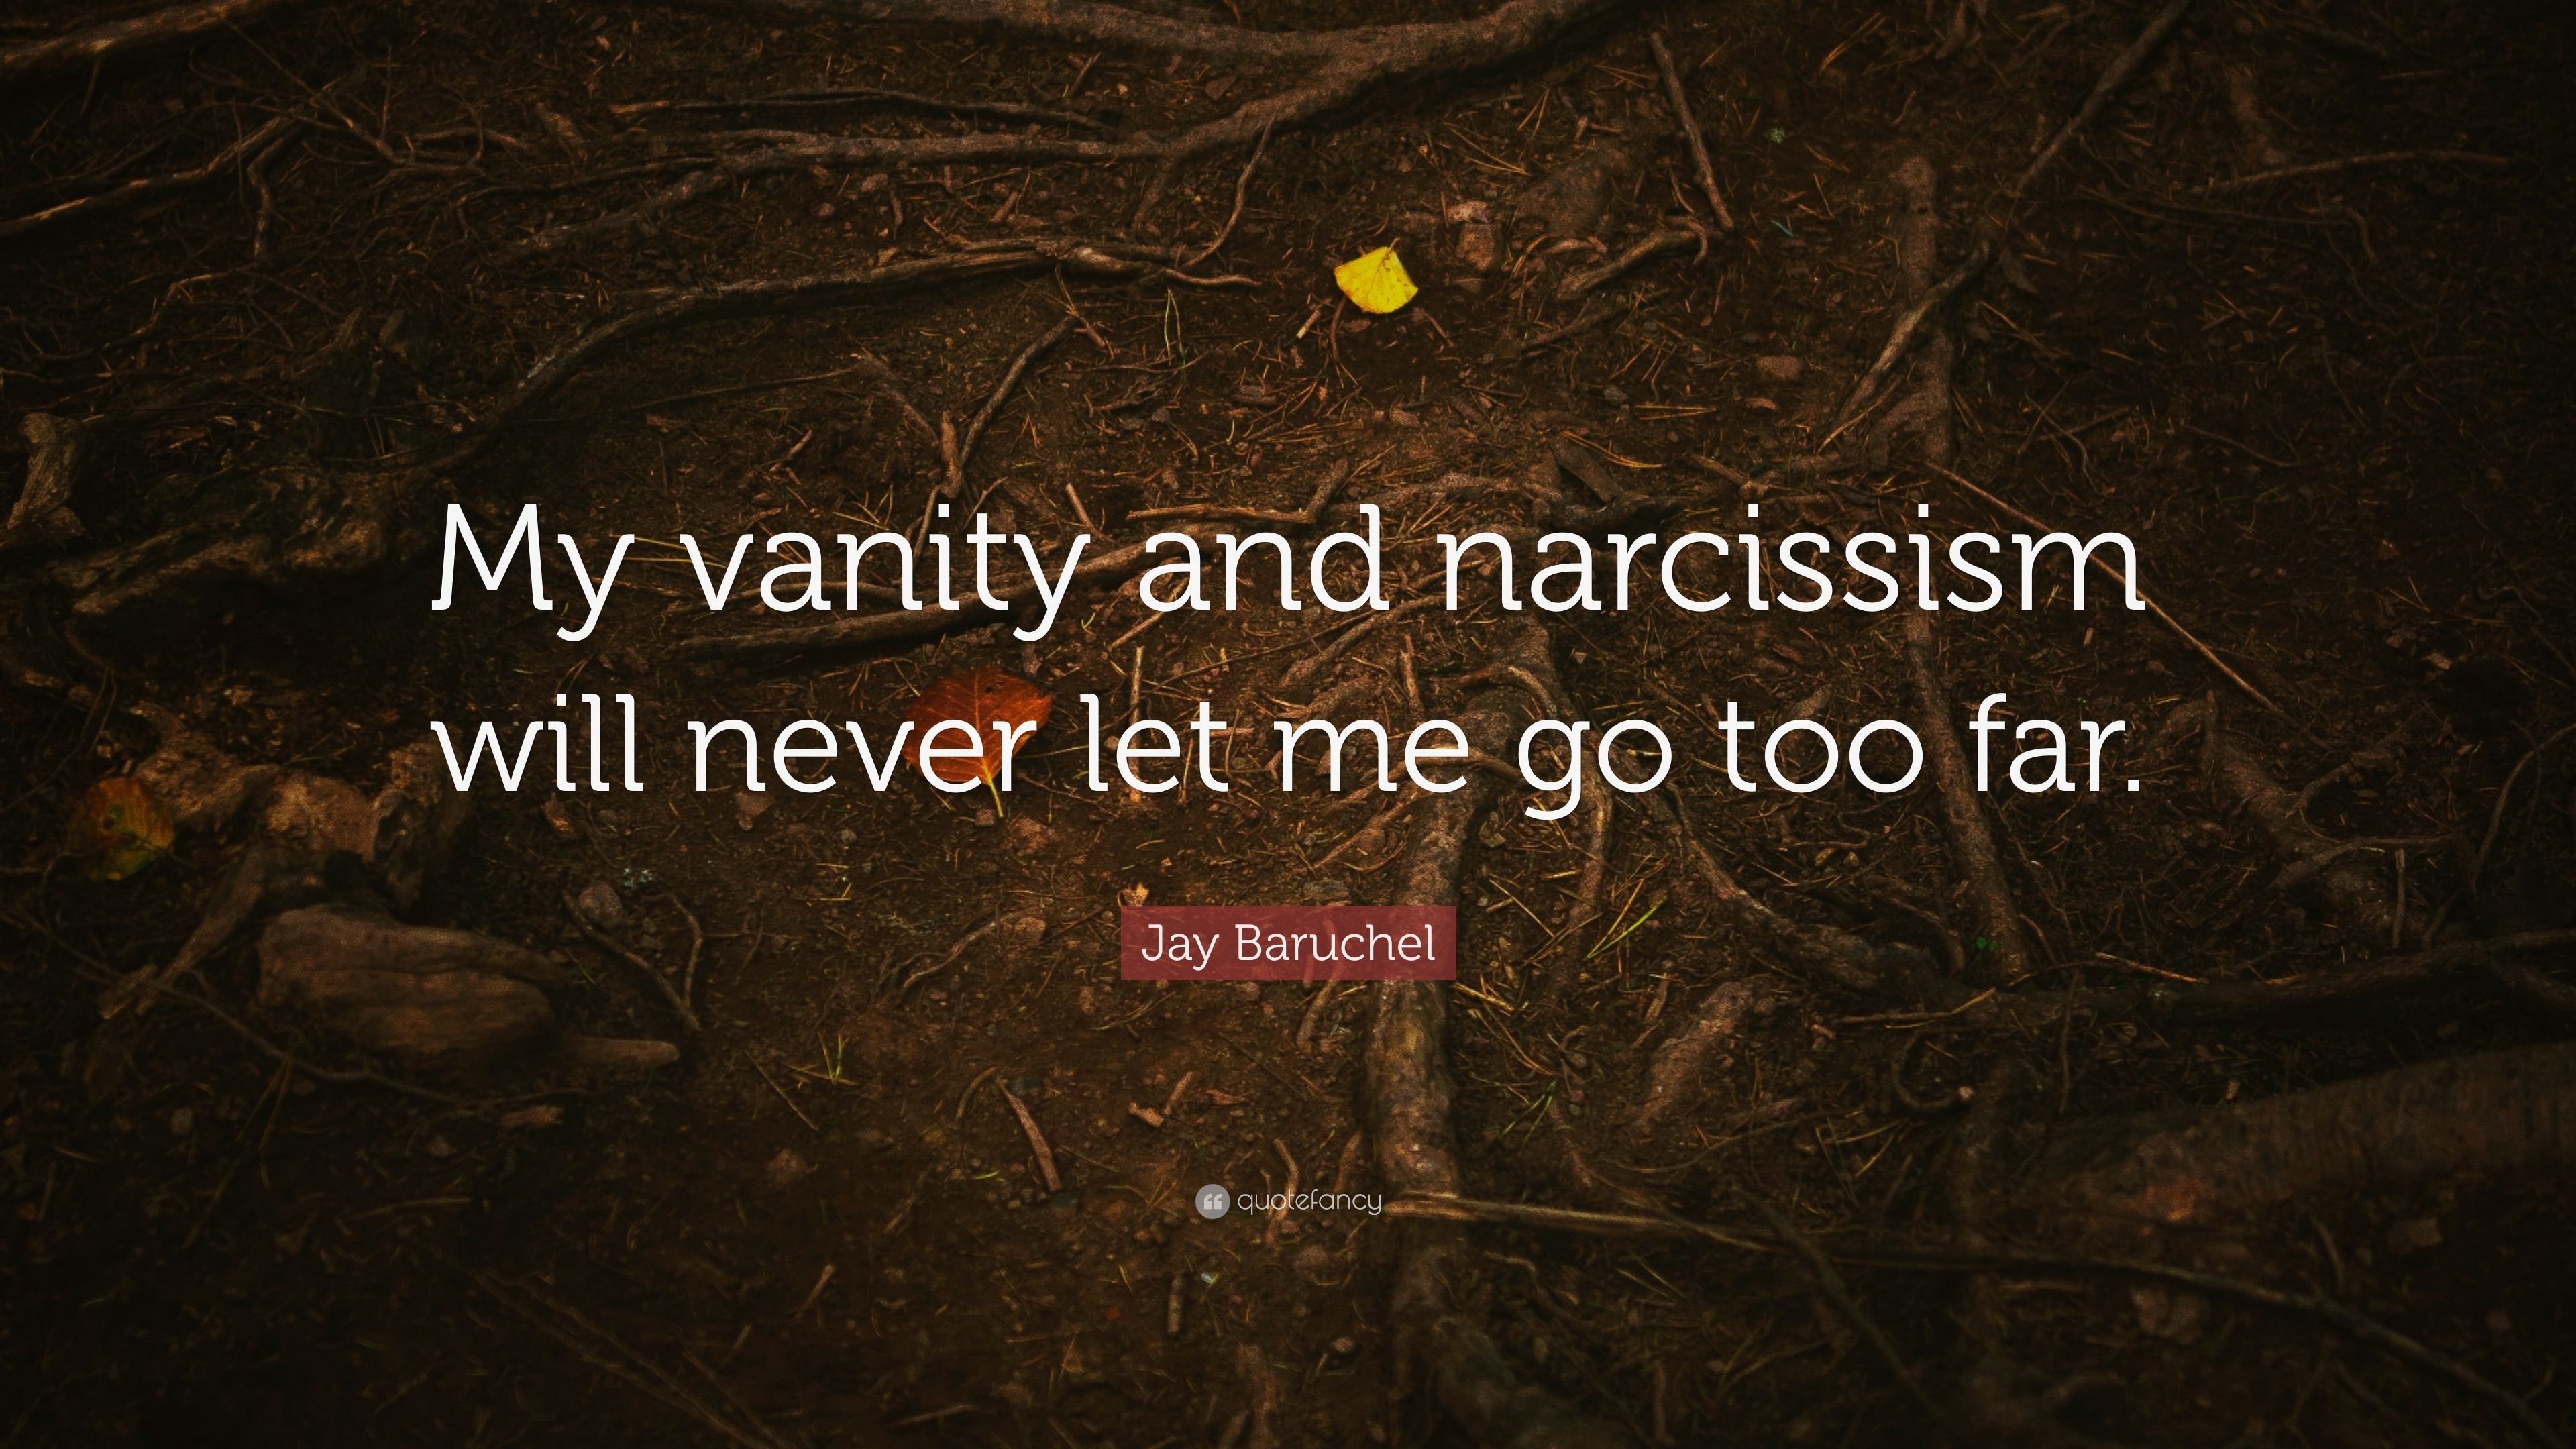 Jay Baruchel Quote: “My vanity and narcissism will never let me go